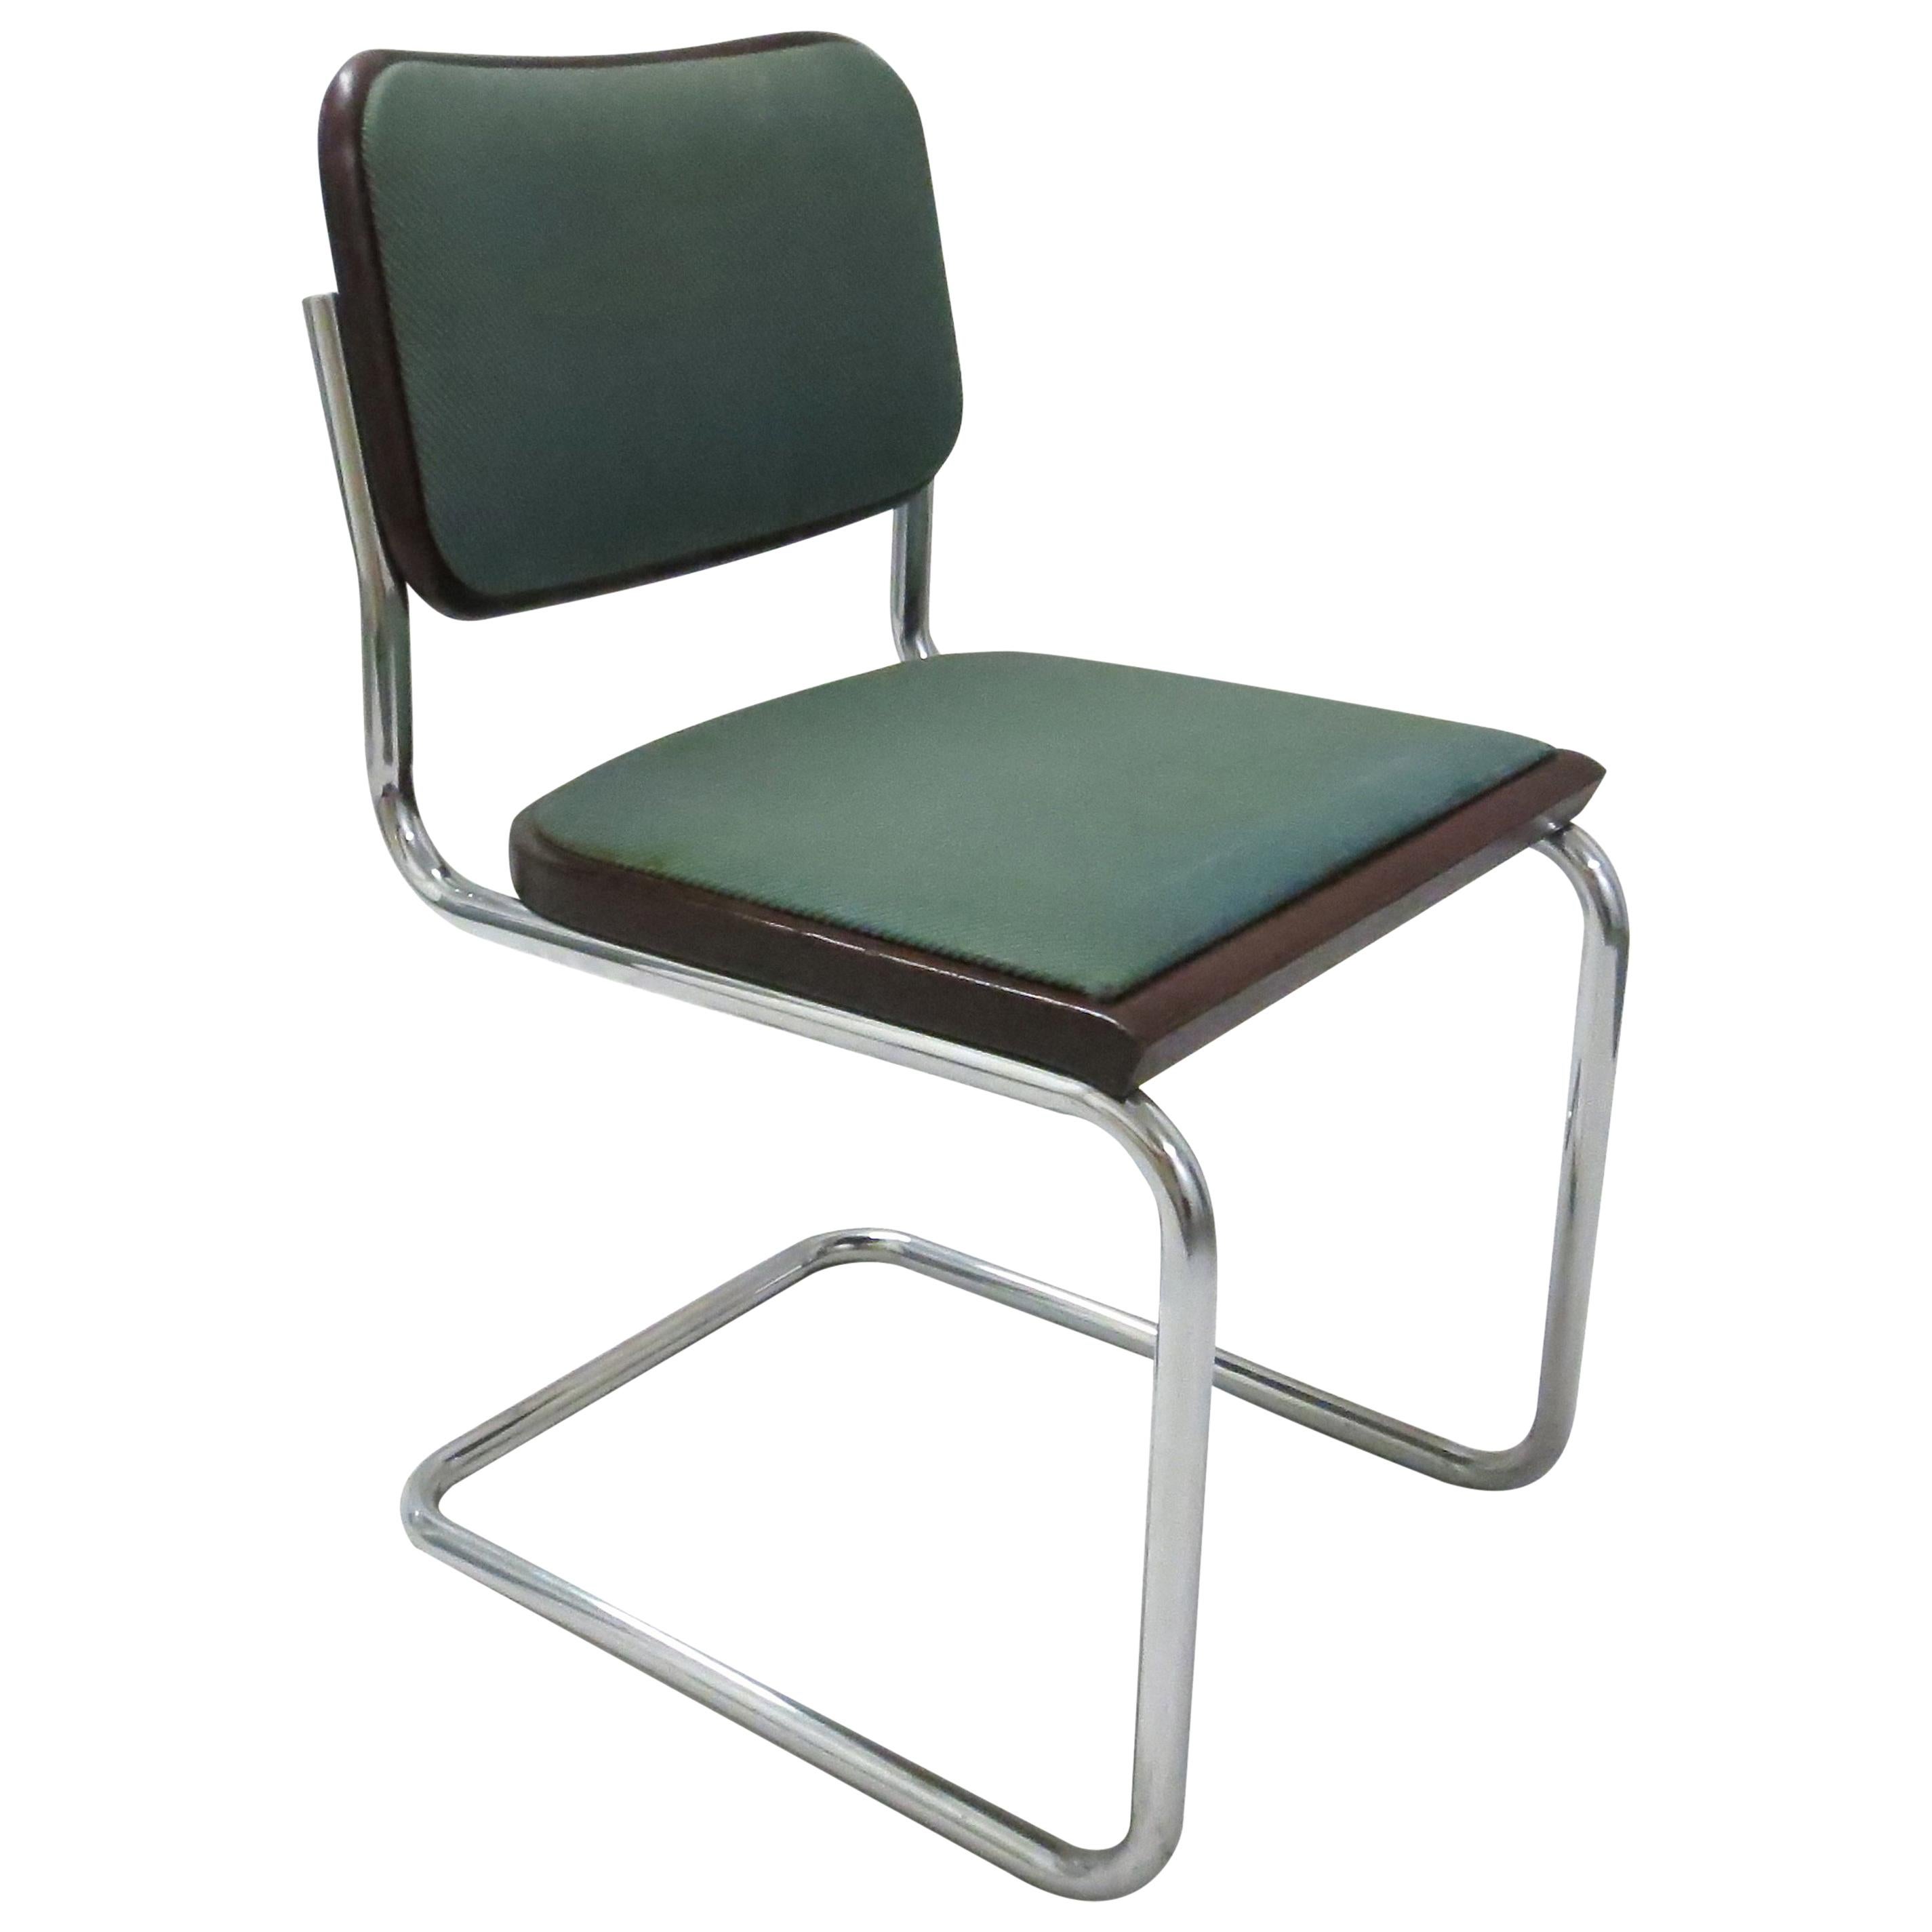 100 Cesca Chairs by Marcel Breuer for Knoll, 1985, USA